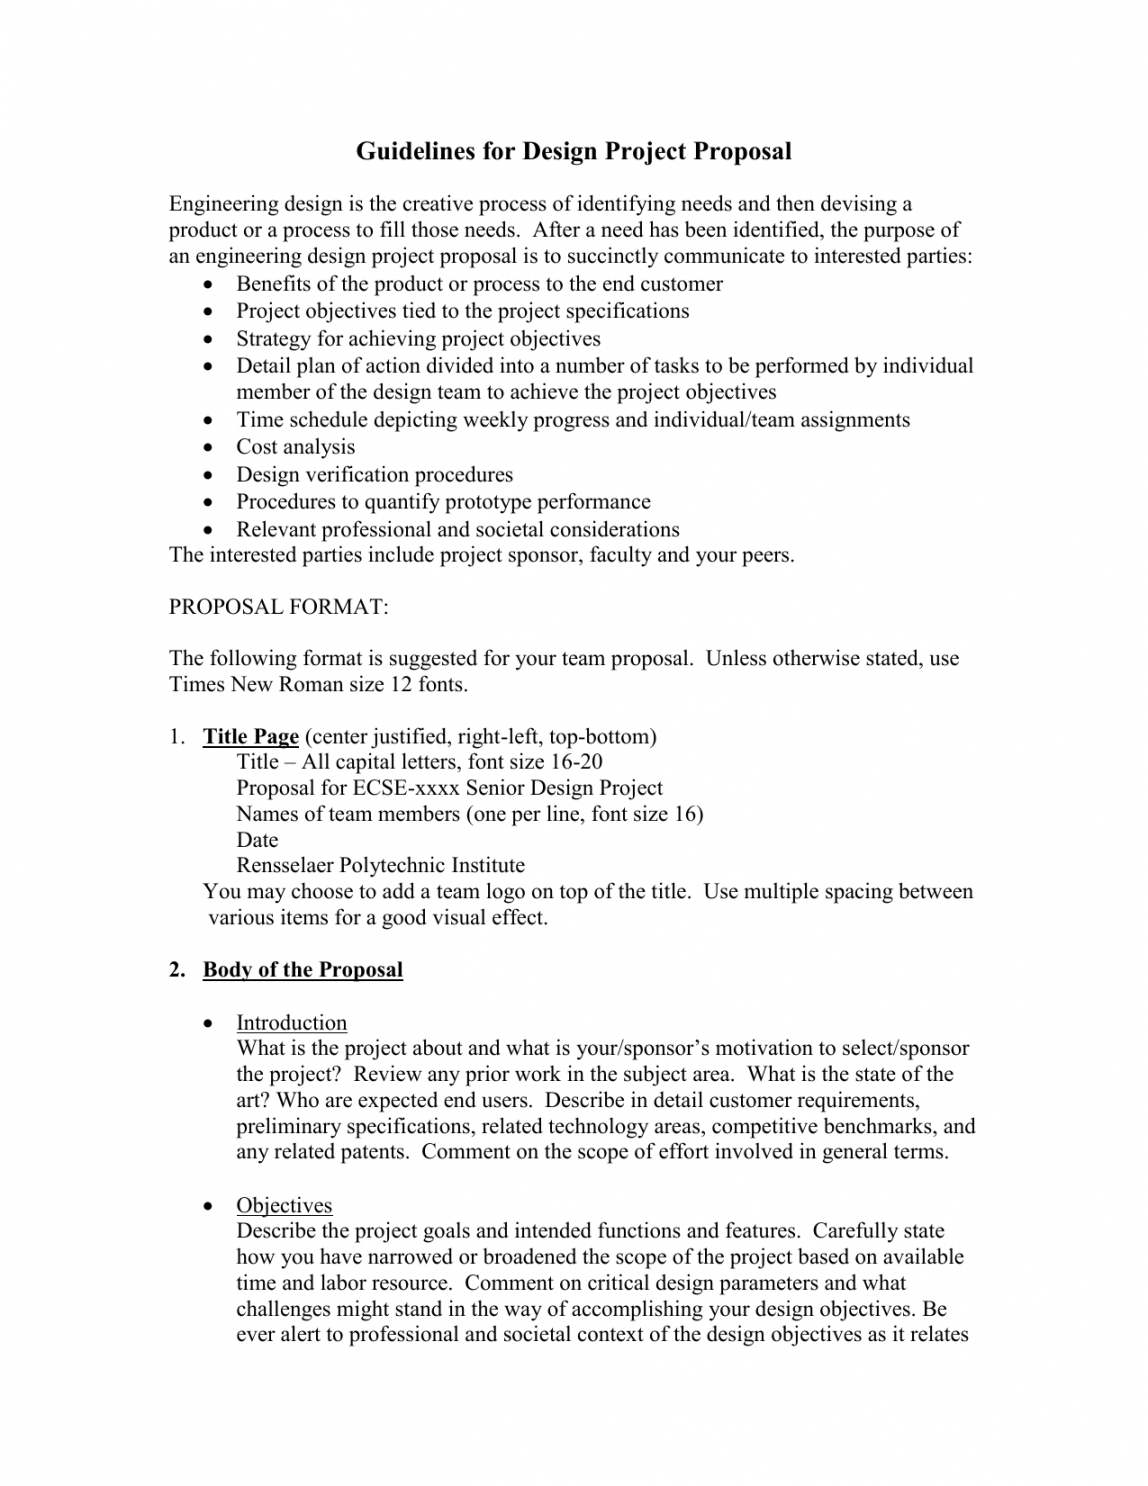 printable guidelines for design project proposal senior design project proposal template doc